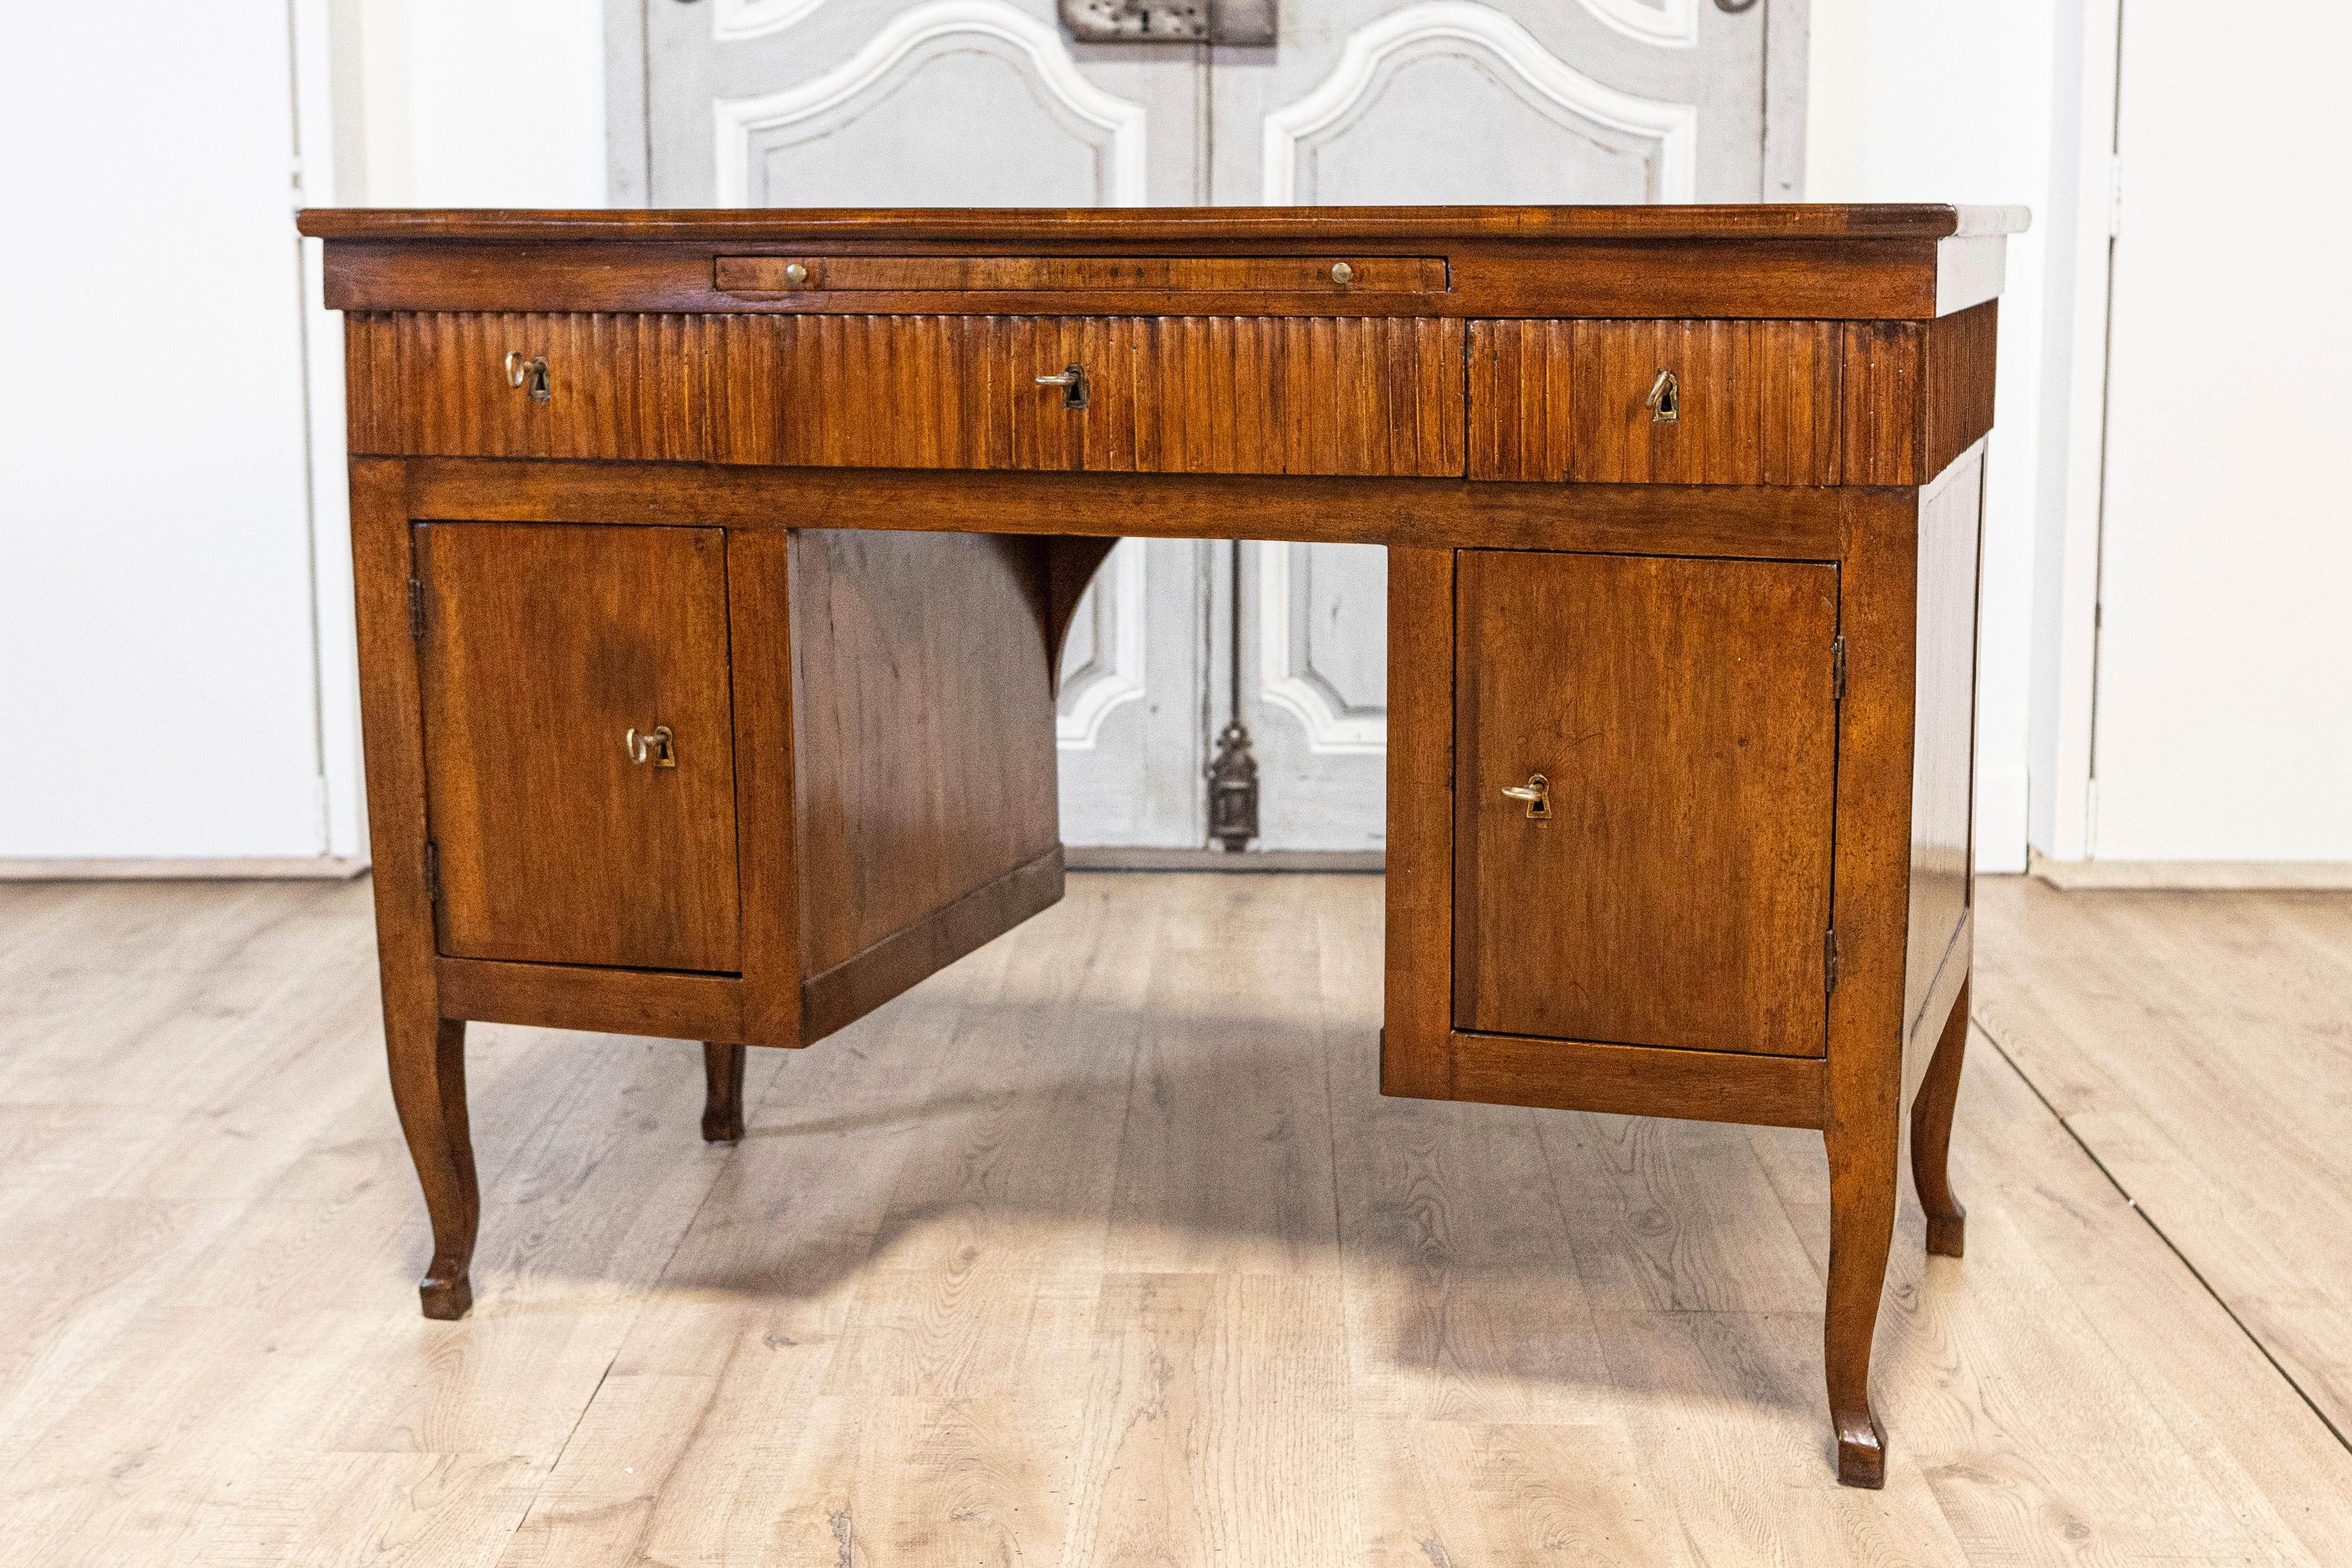 Leather Italian 18th Century Walnut Desk with Carved Reeded Apron, Drawers and Doors For Sale